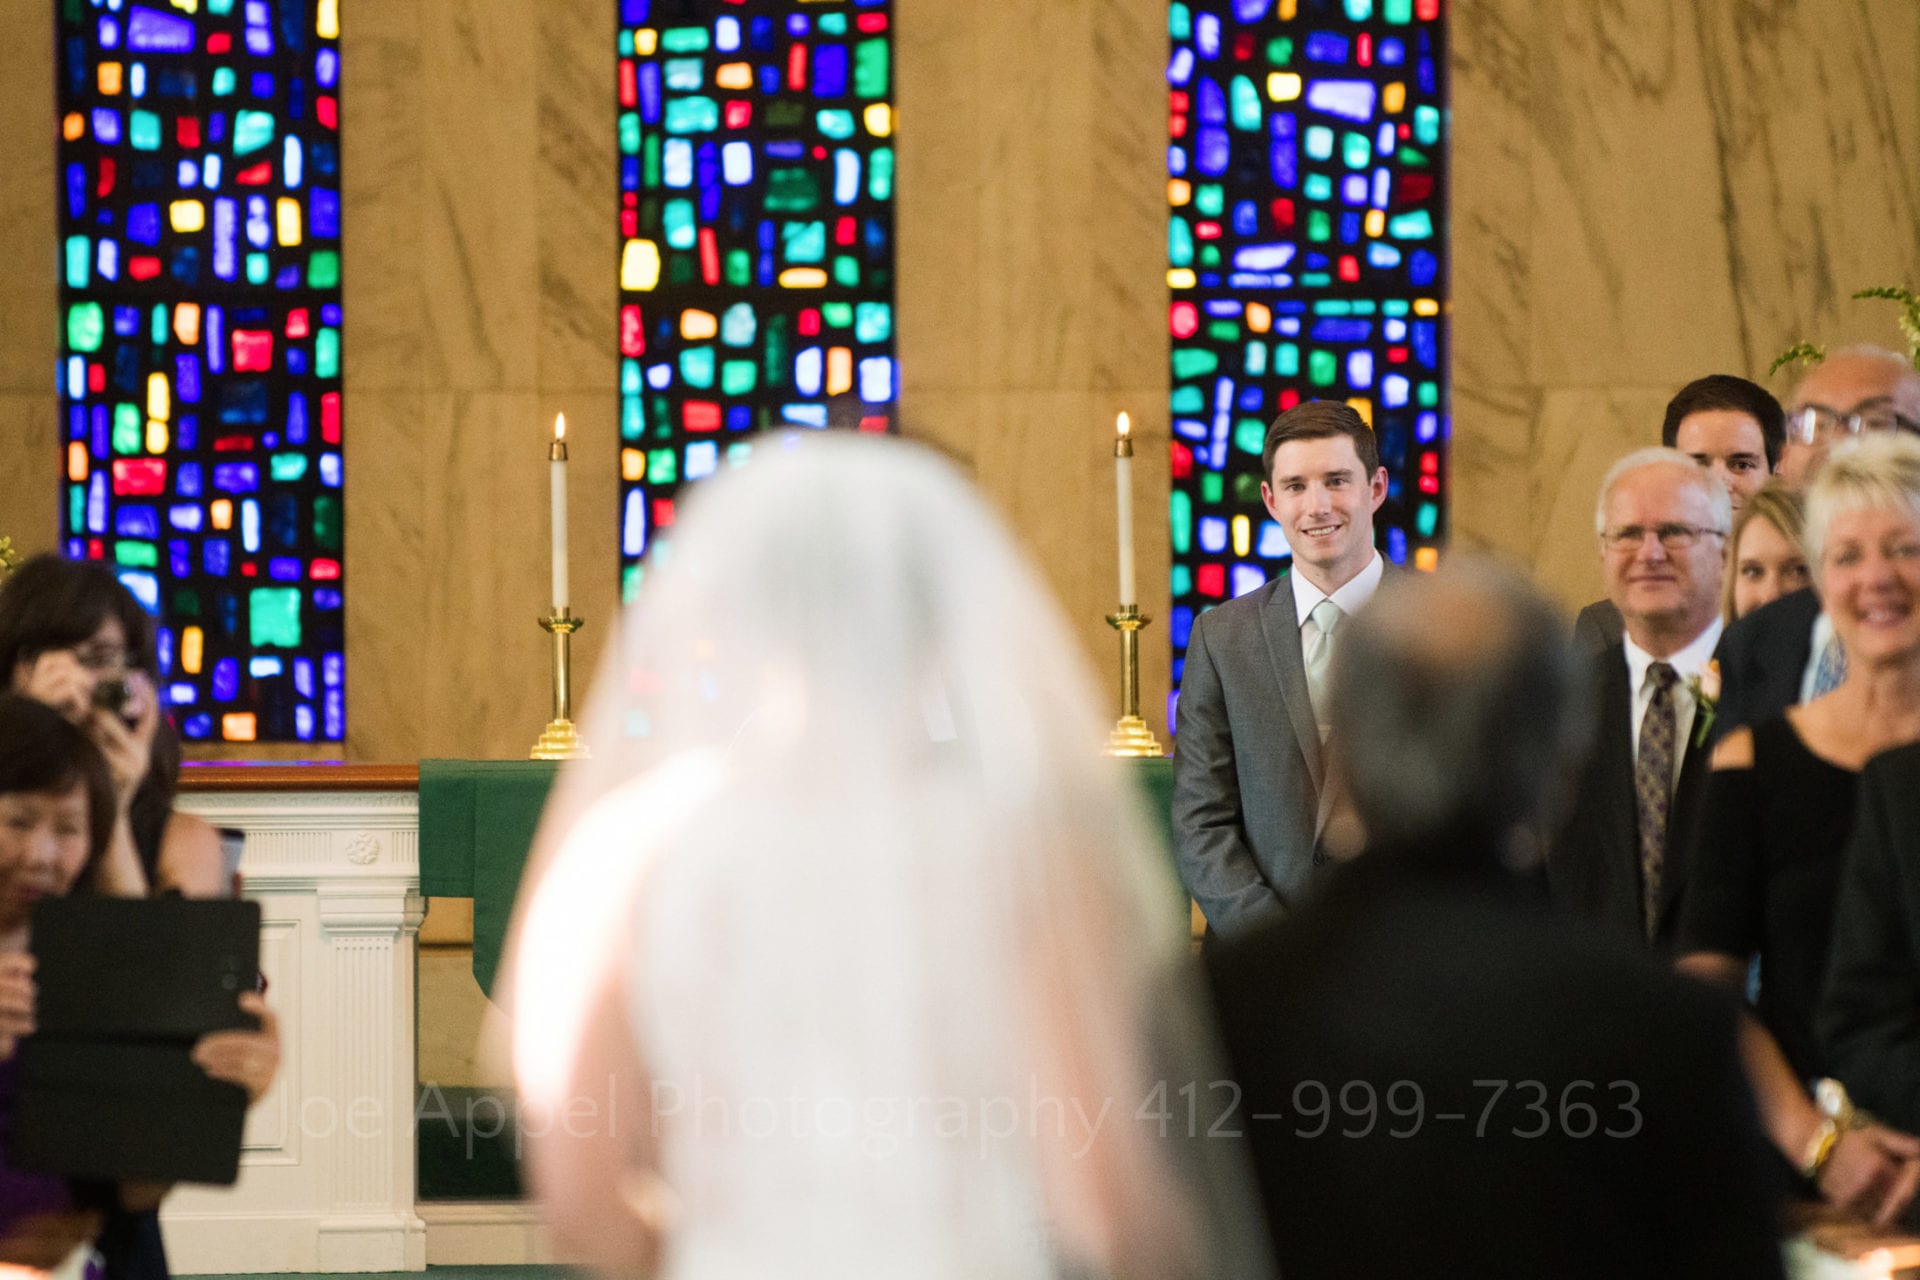 a groom stands in front of colorful stained glass windows and smiles at his bride